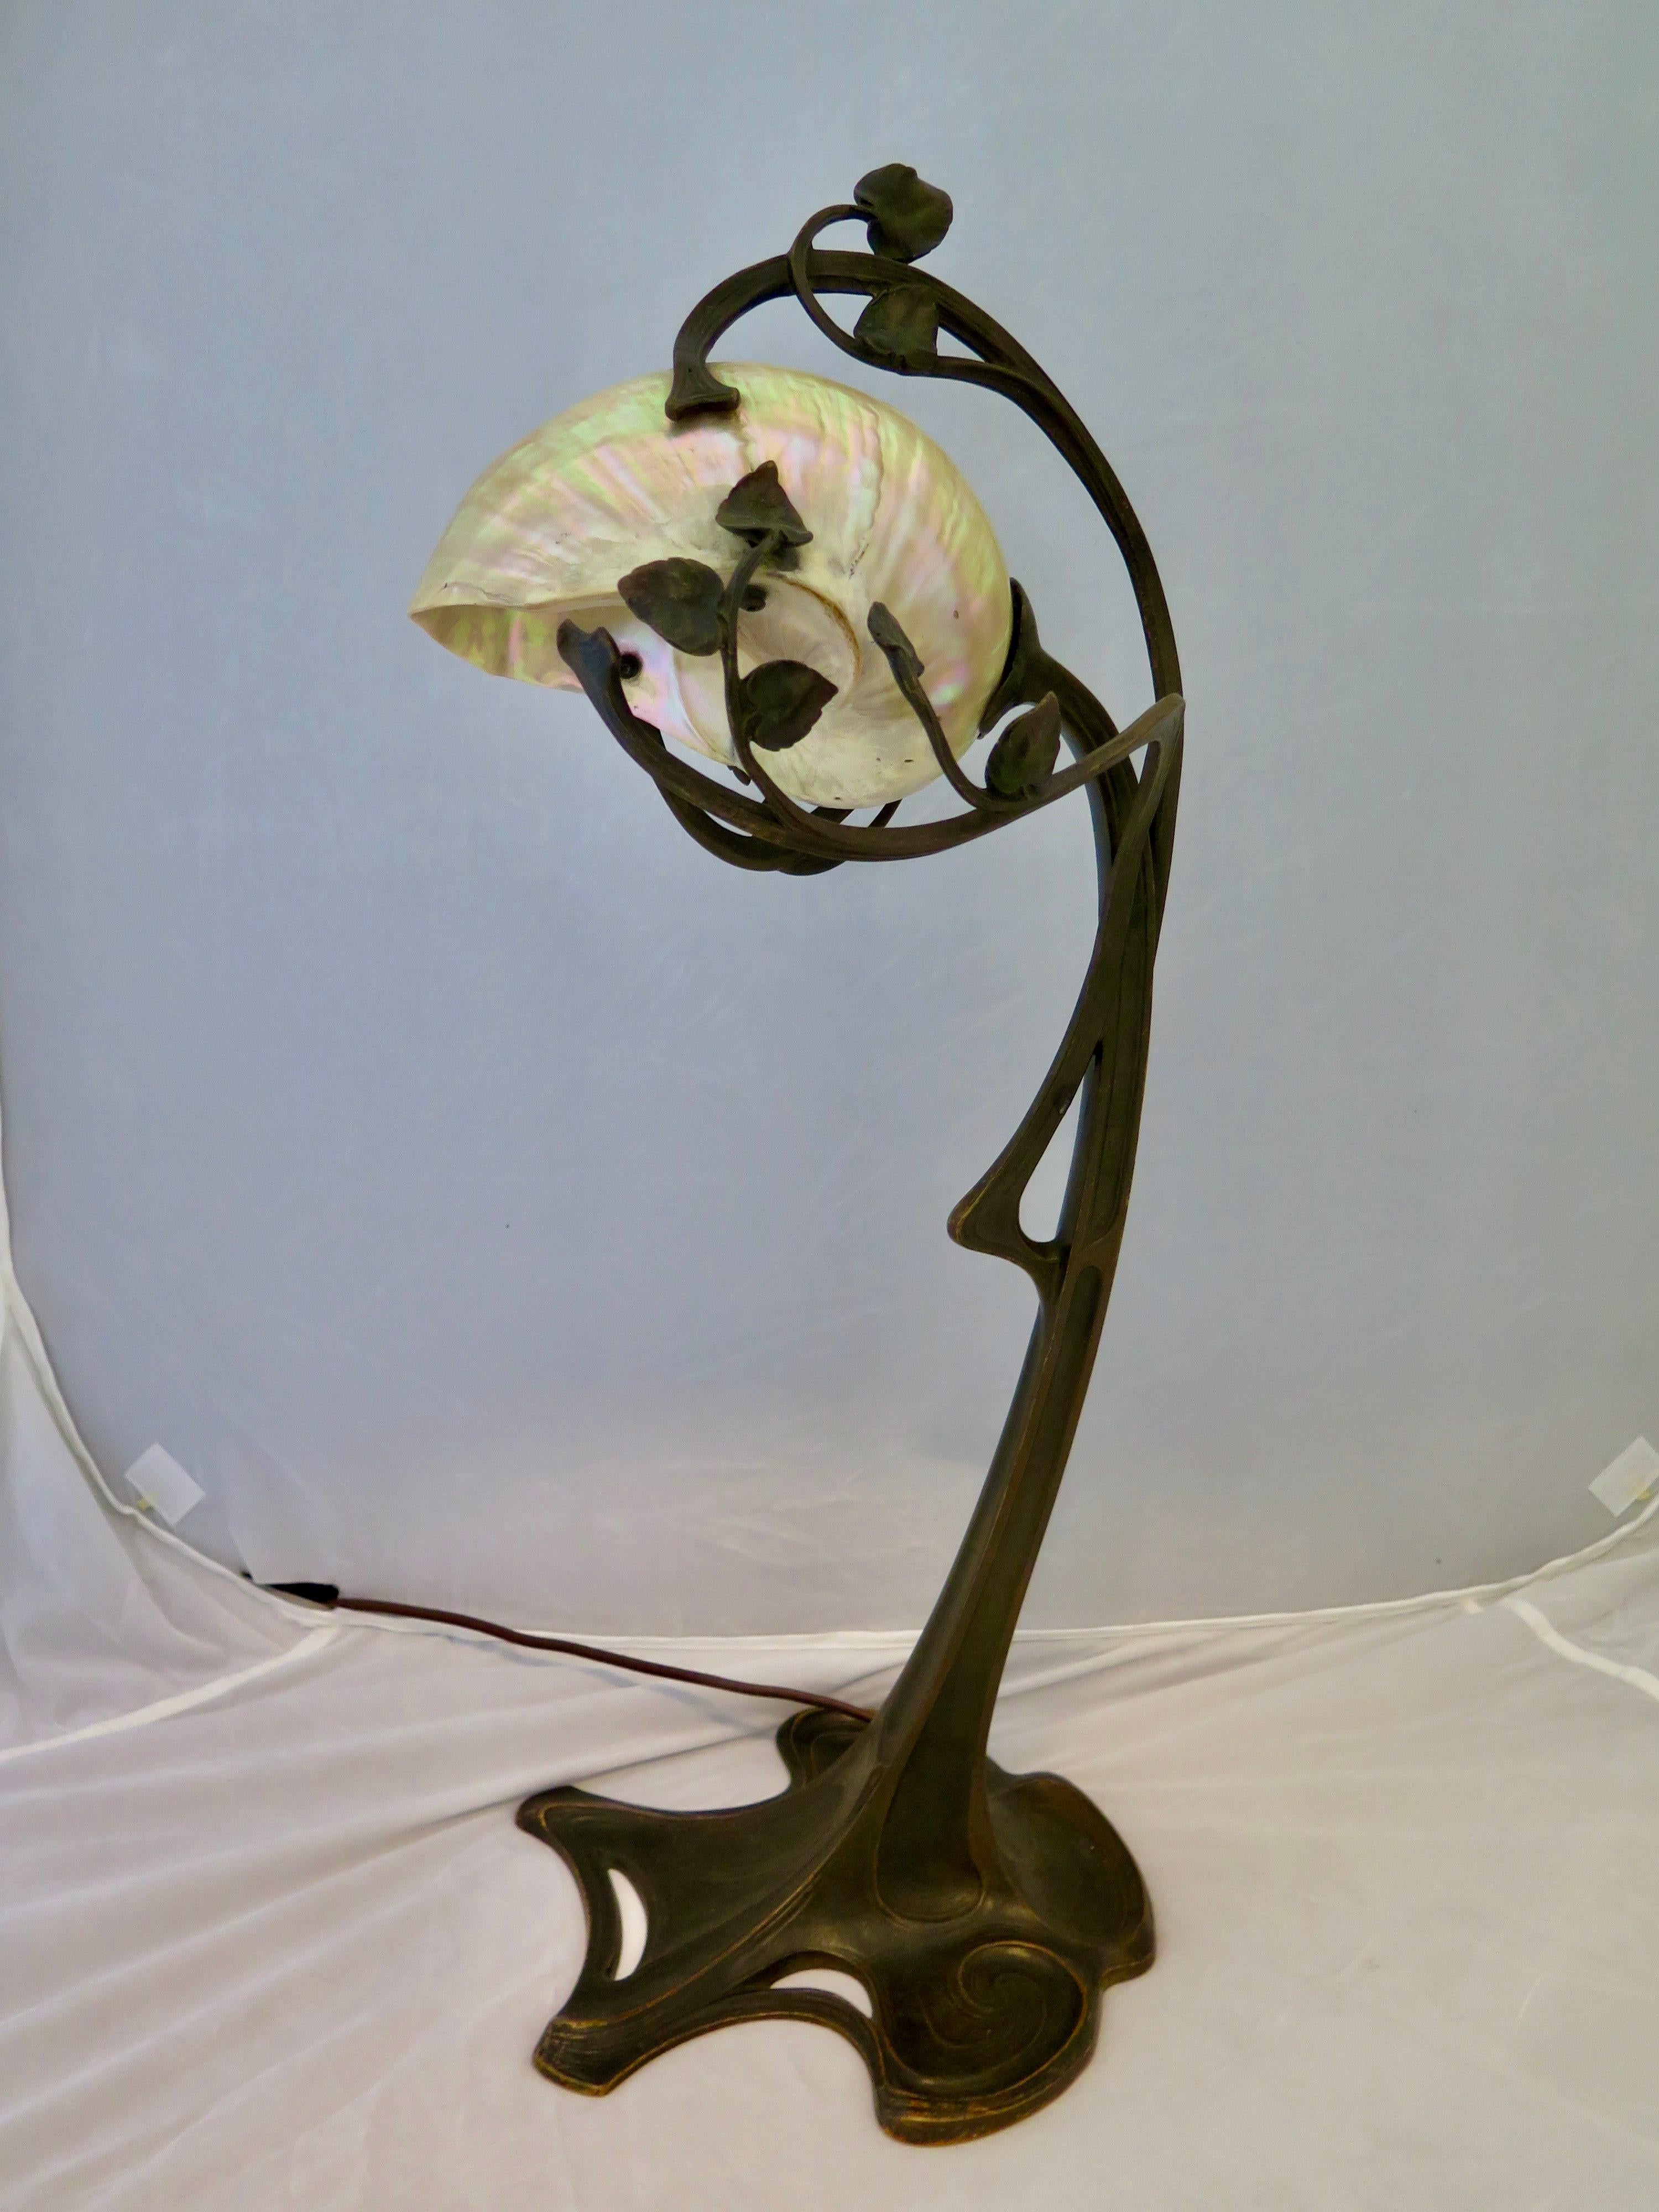 The flowing decorative spiralling vines arching upward and above the stylish patinated bronze base are fundamentals of the French Art Nouveau movement. These vines ultimately embrace a wonderful iridescent conch shell. The conch shell conceals a